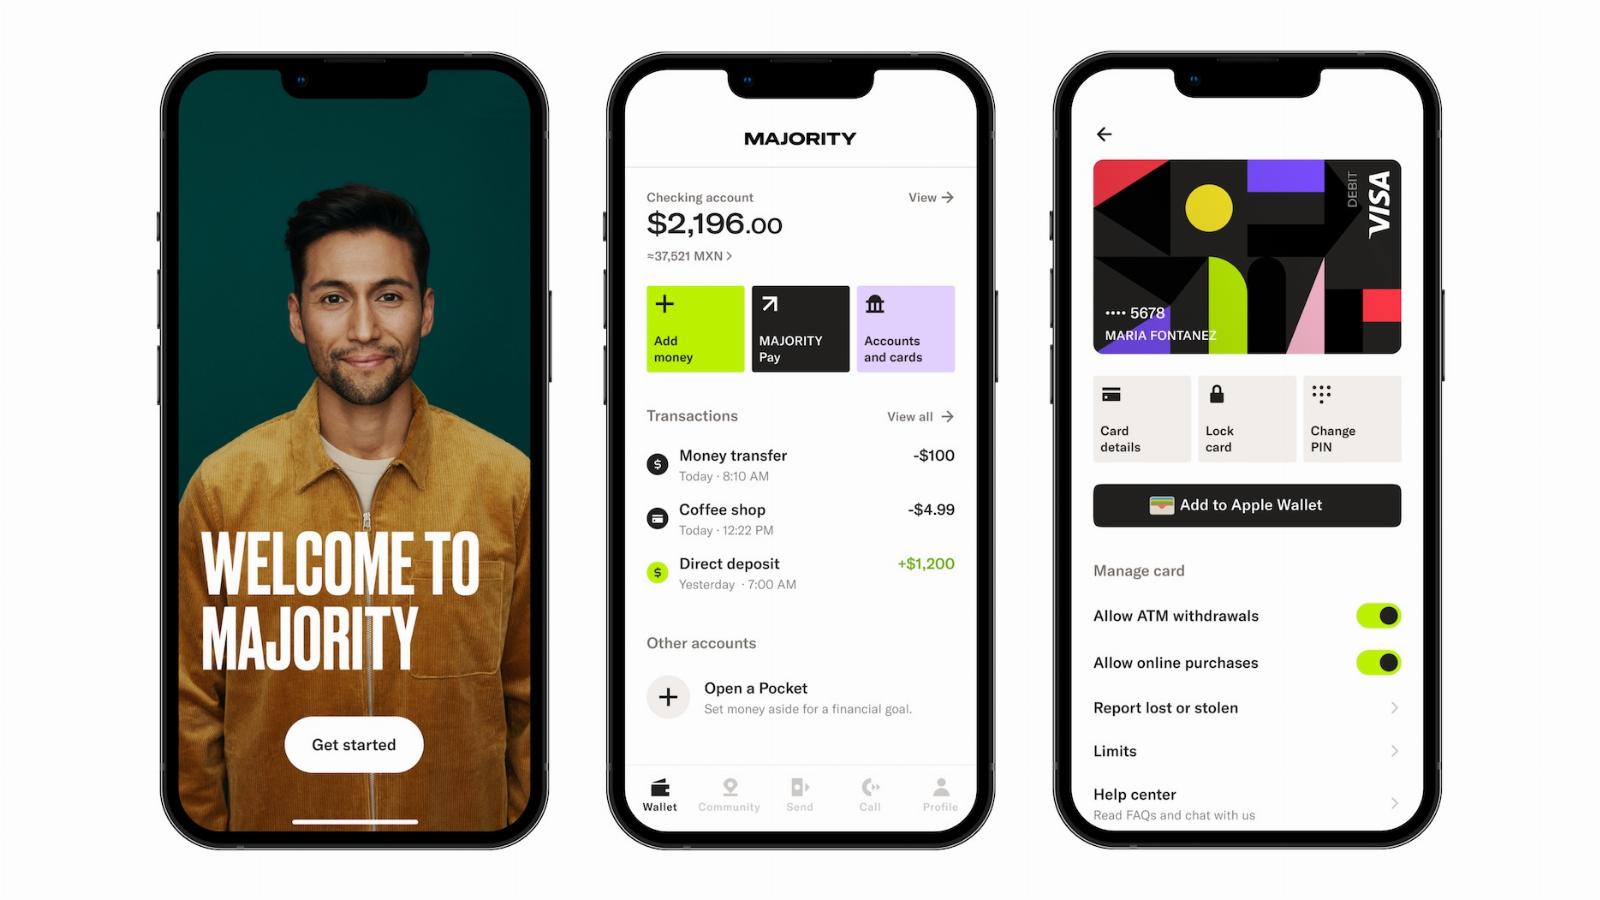 Immigrant banking platform Majority secures $20M following 3x revenue growth